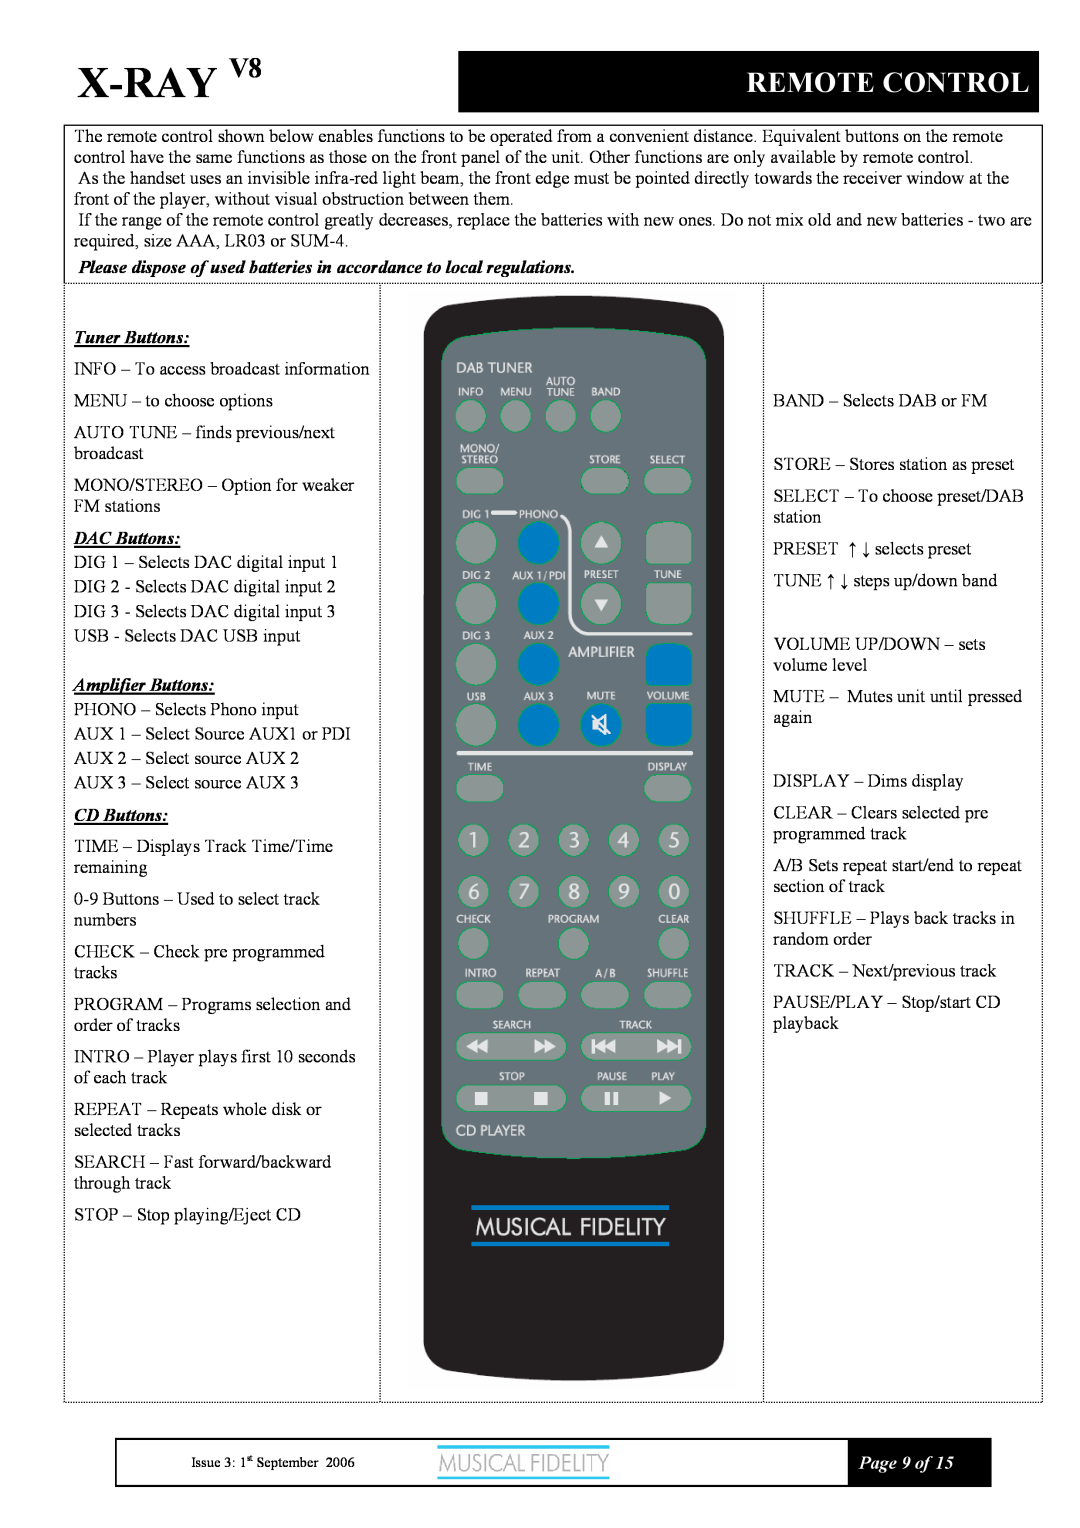 Musical Fidelity V8 manual Remote Control, X-Ray, Tuner Buttons, DAC Buttons, Amplifier Buttons, CD Buttons, Page 9 of 